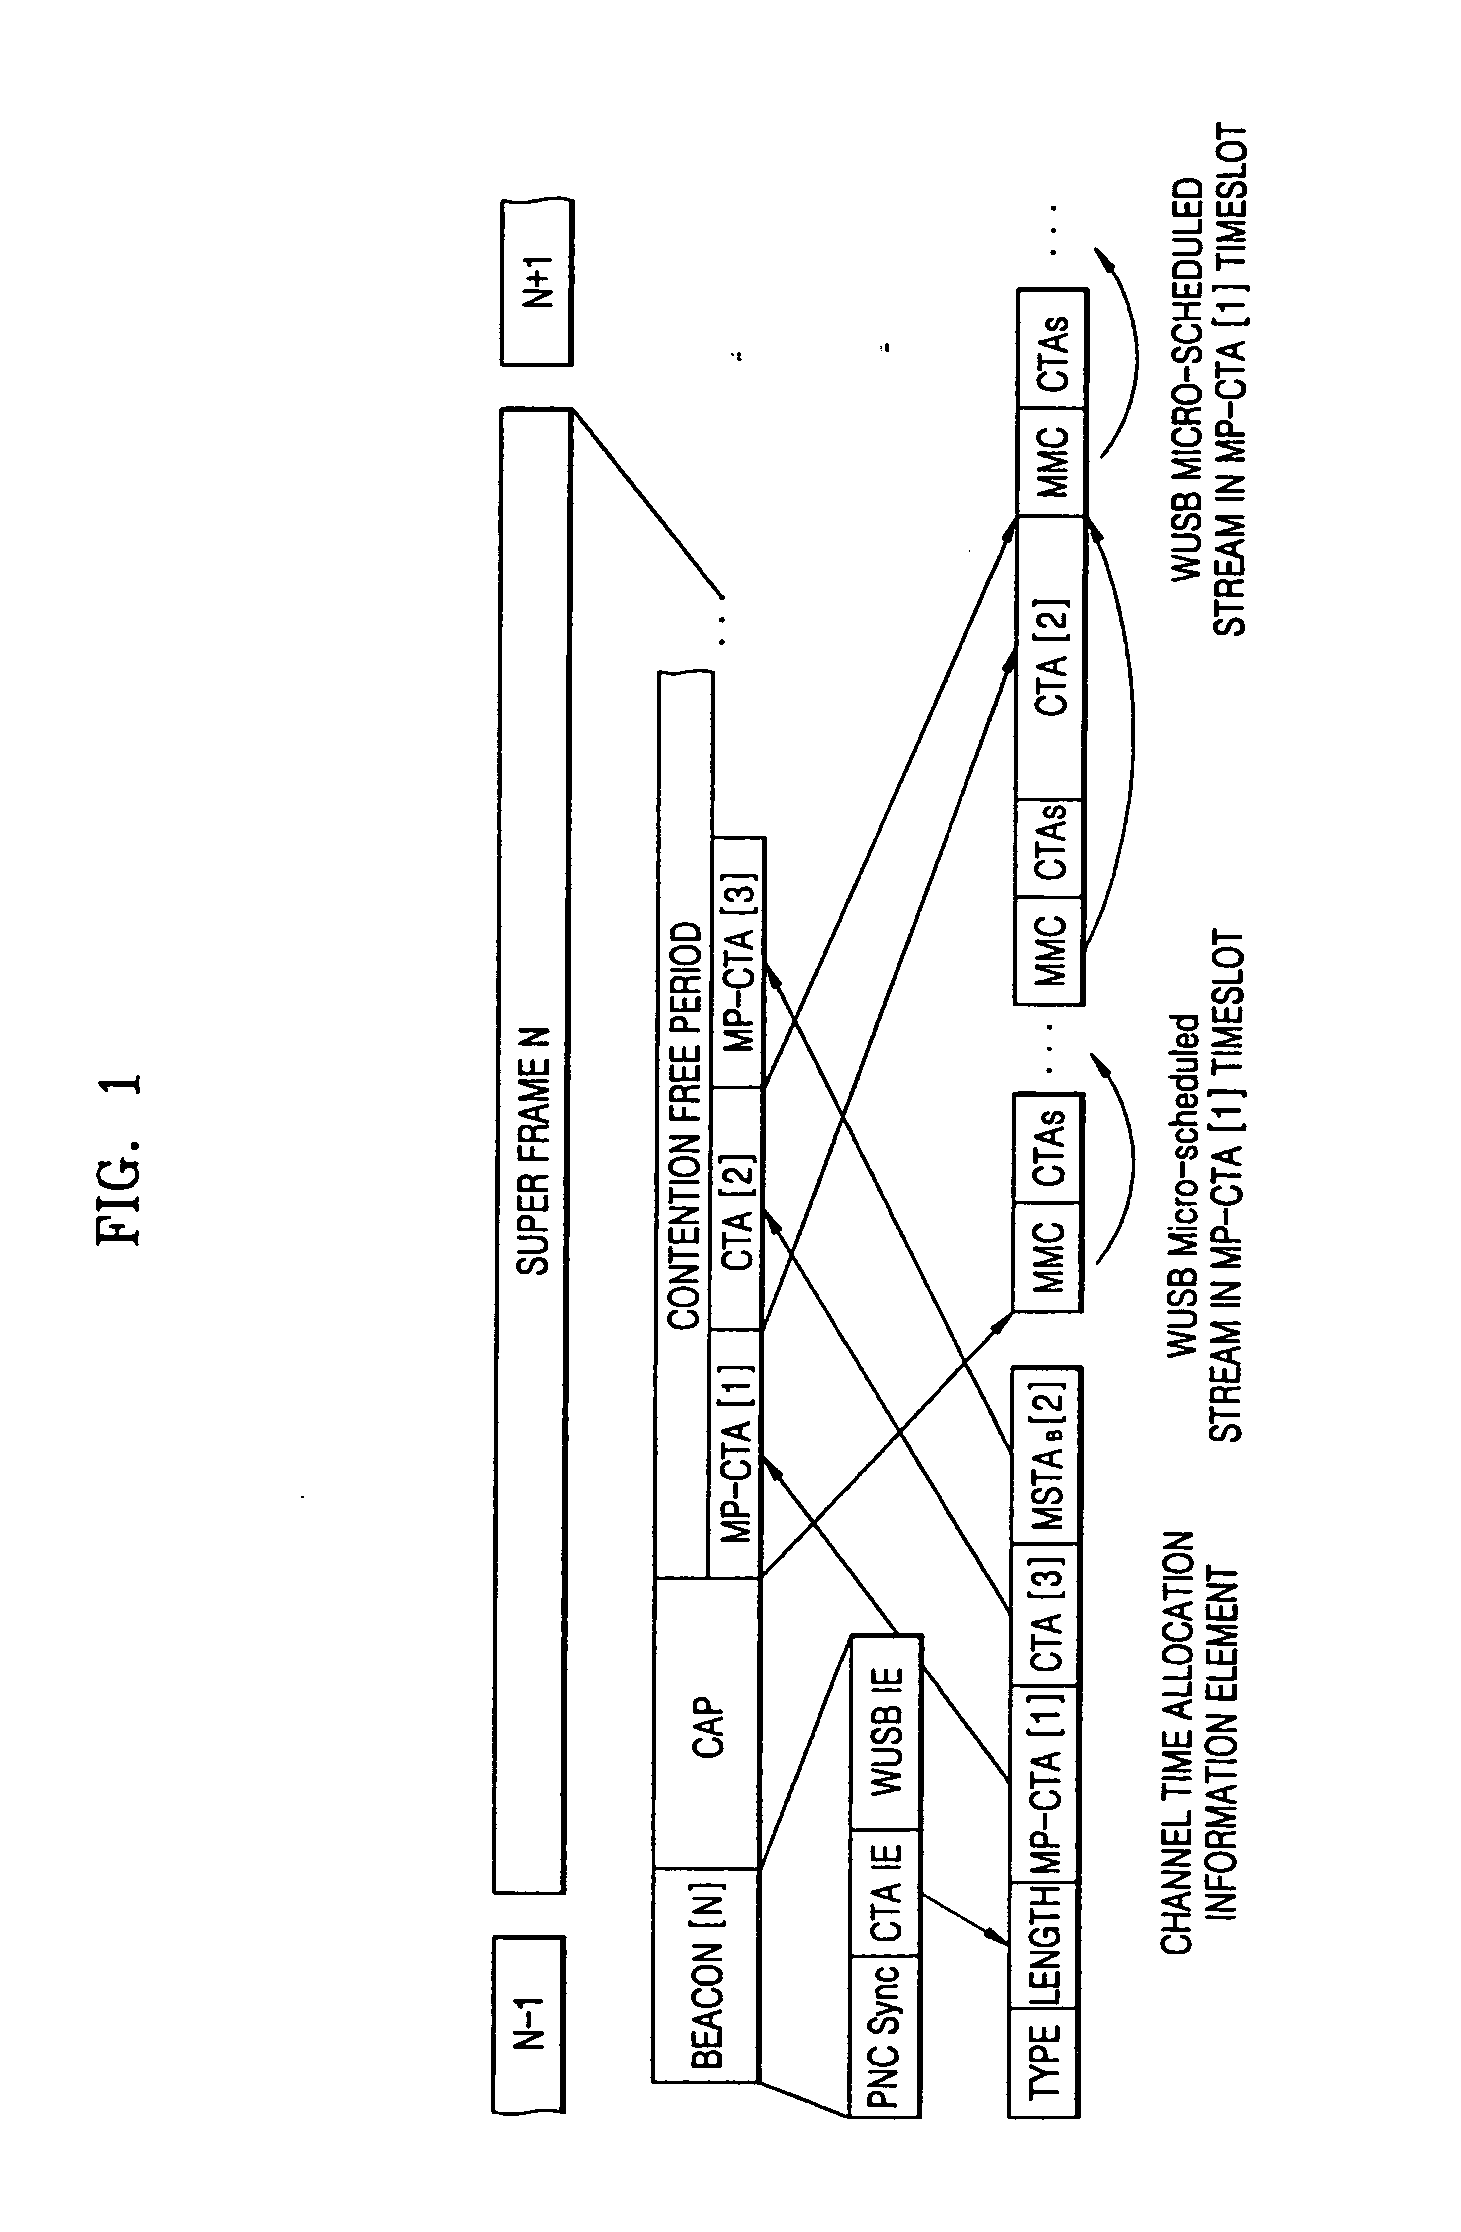 Method and apparatus for transmitting and receiving data via wireless universal serial bus (WUSB)